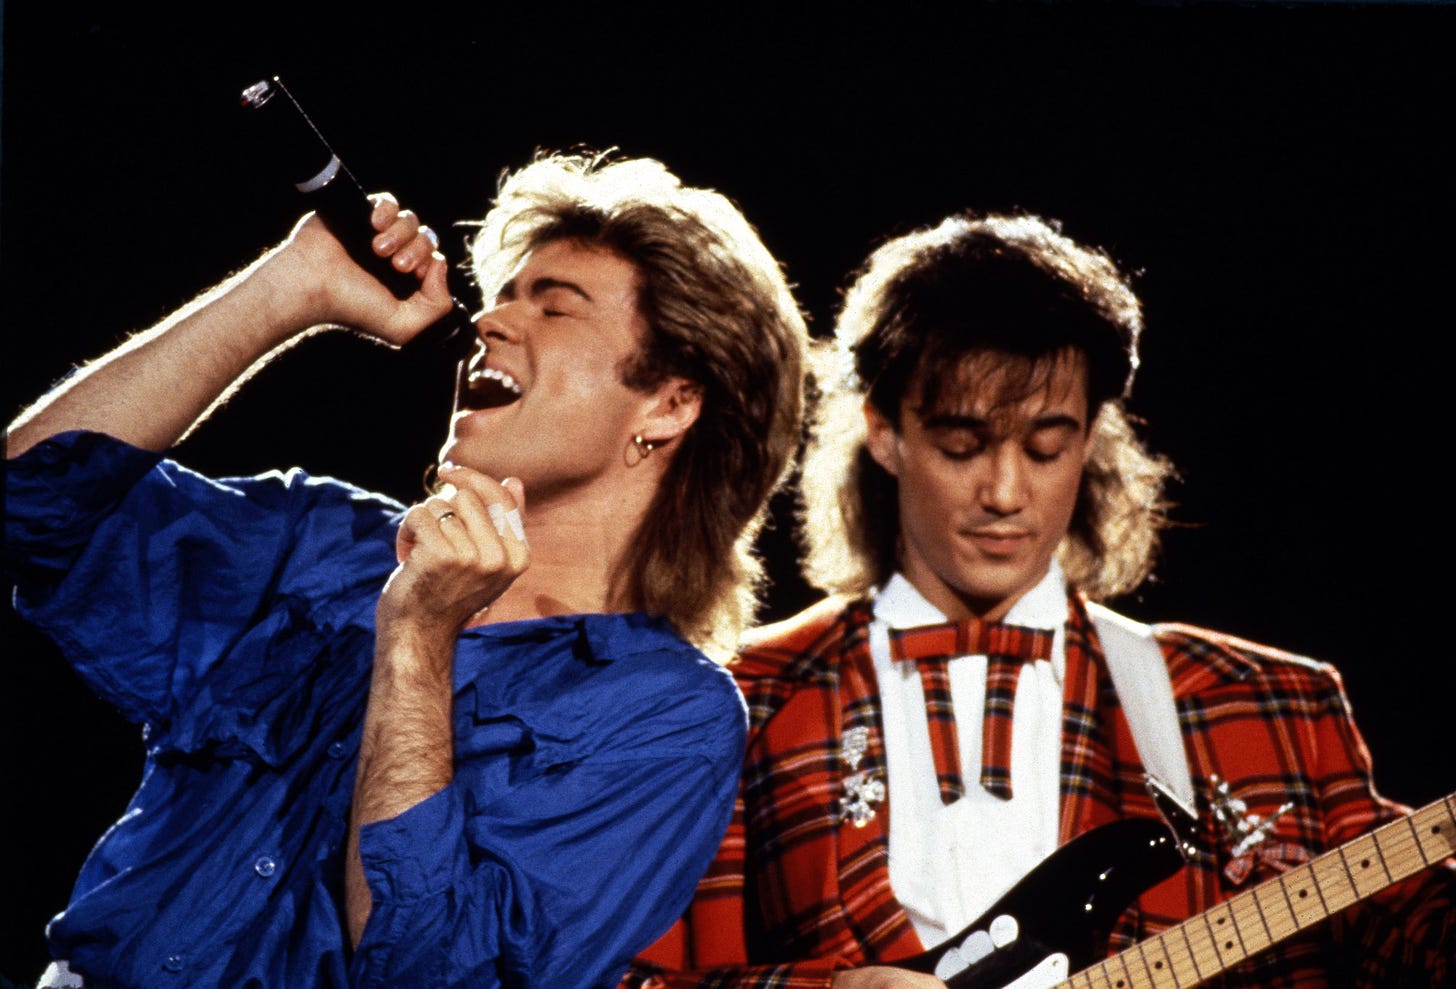 Wham! Documentary Ignores the Music, But Celebrates the Duo's Bond